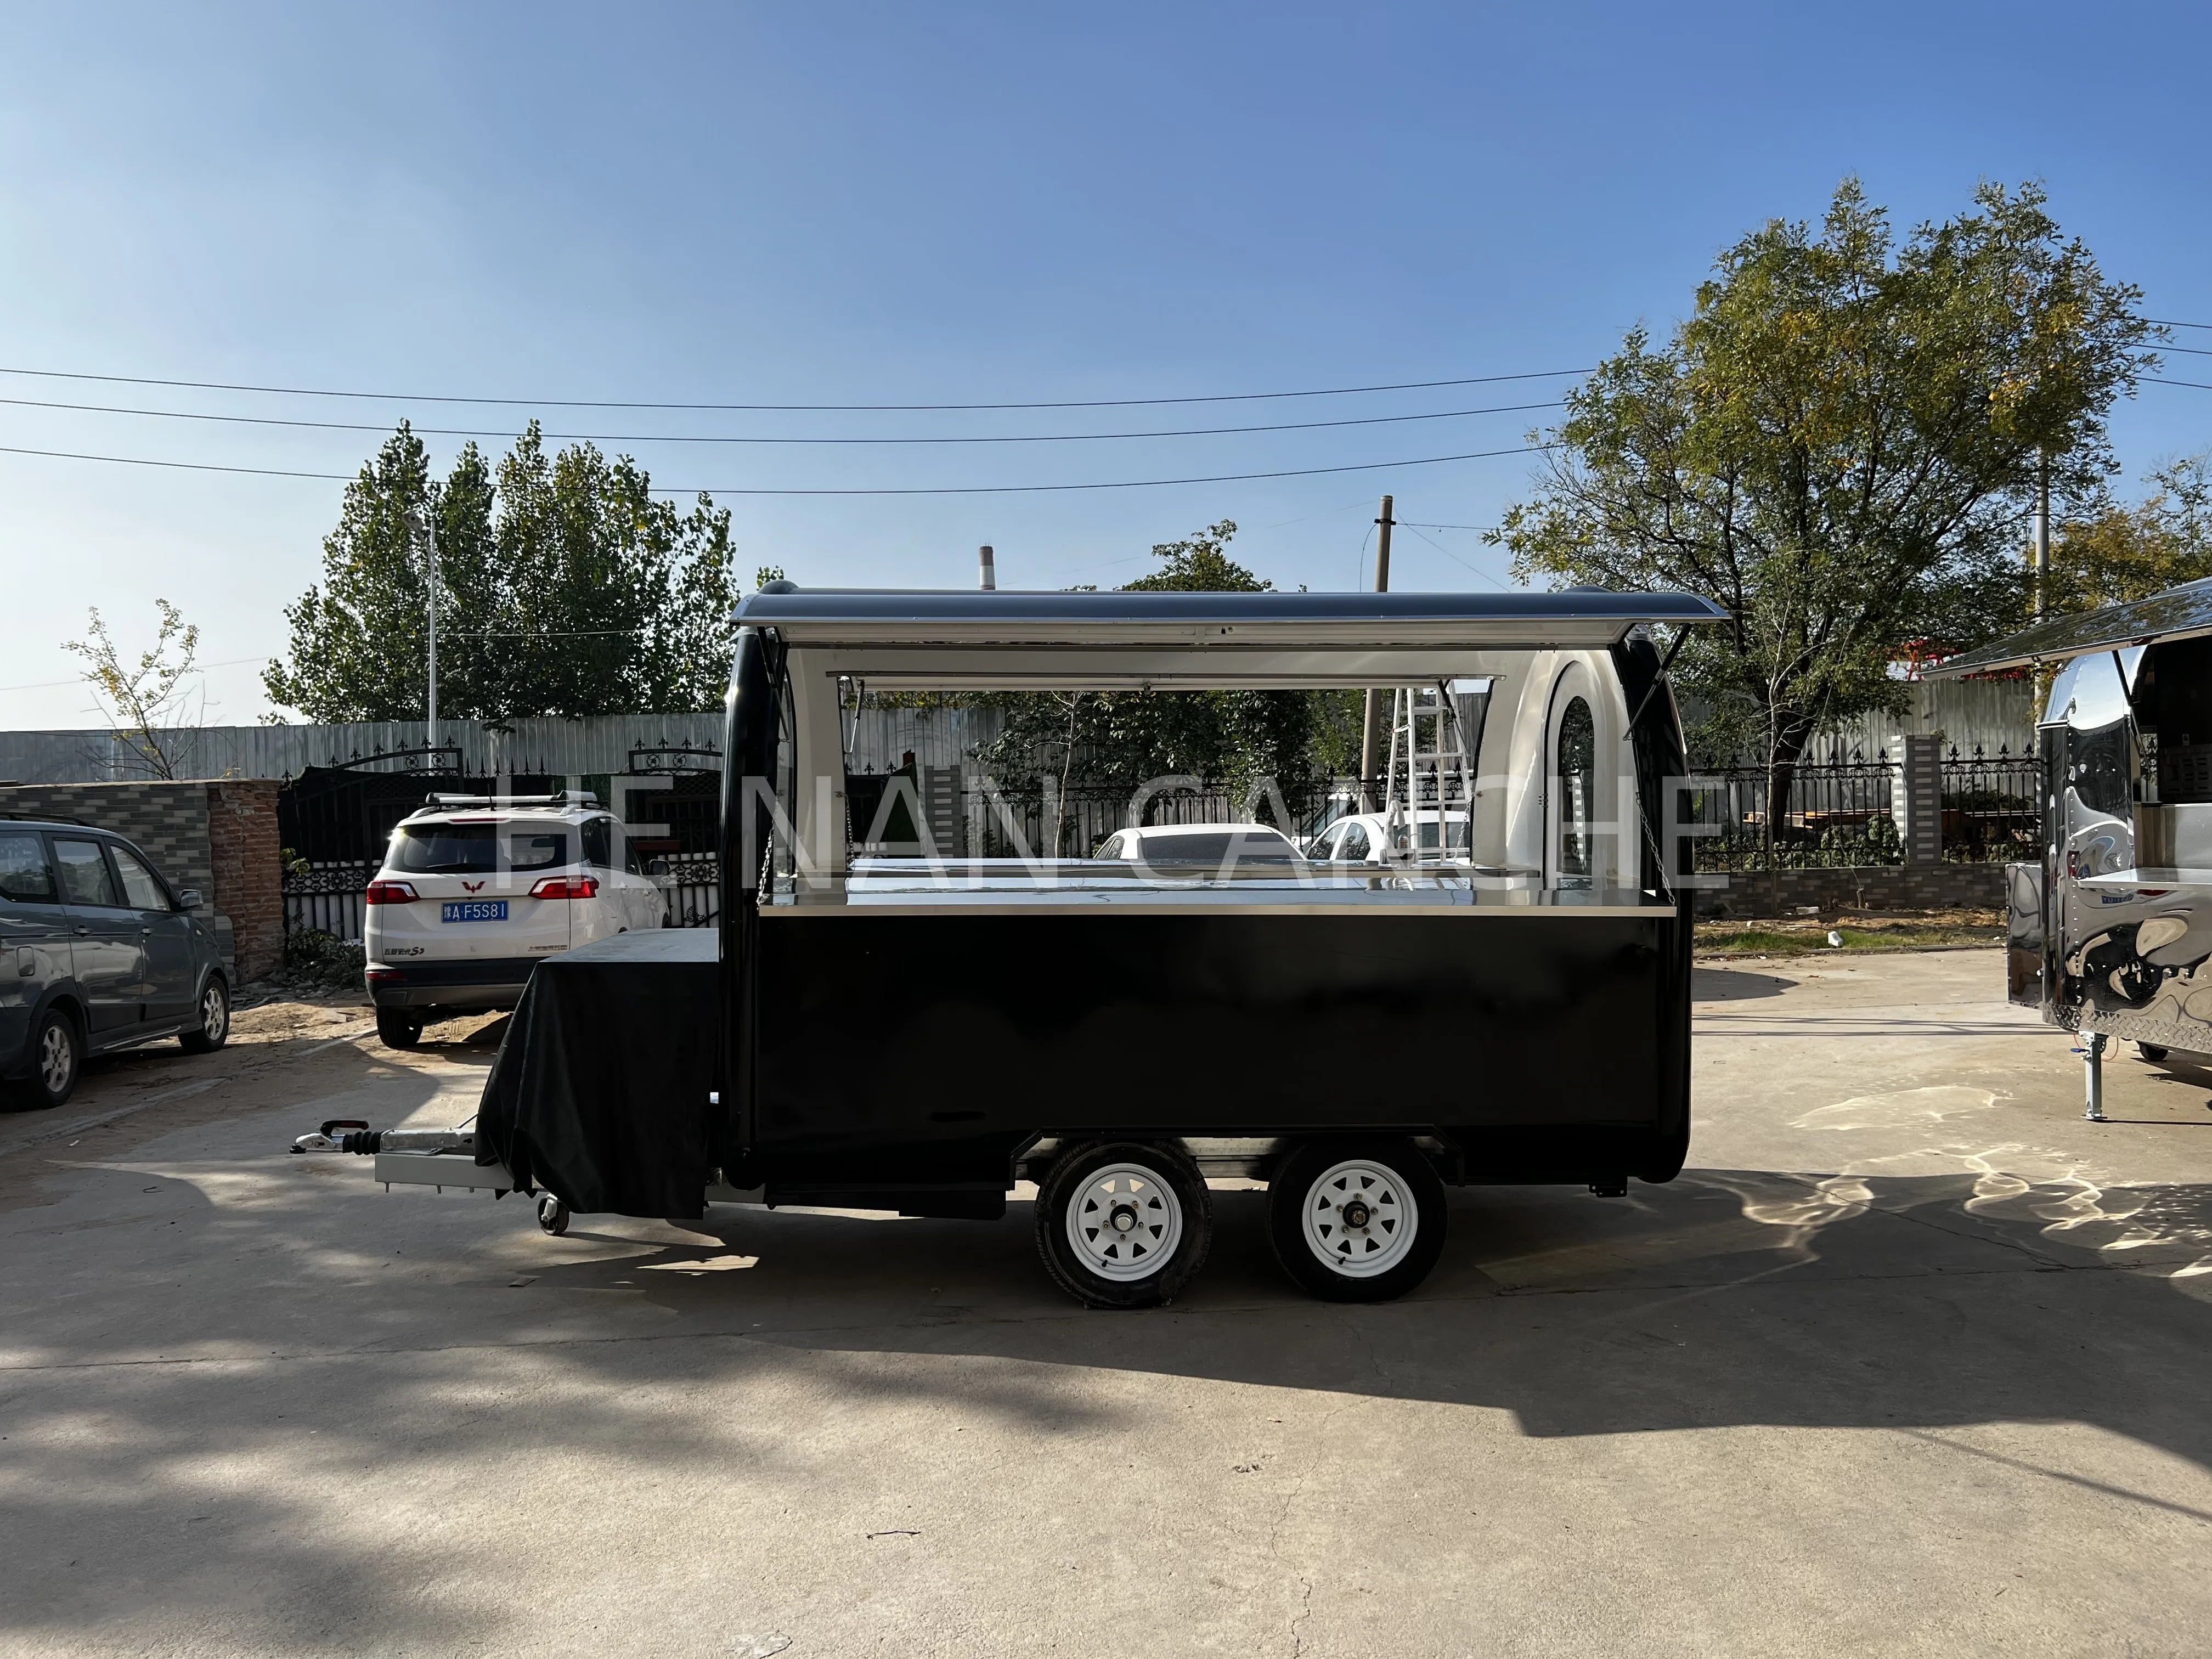 ISO approved American standard street food trailers with 3 sinks, ice cream mobile stalls & hot dog cart